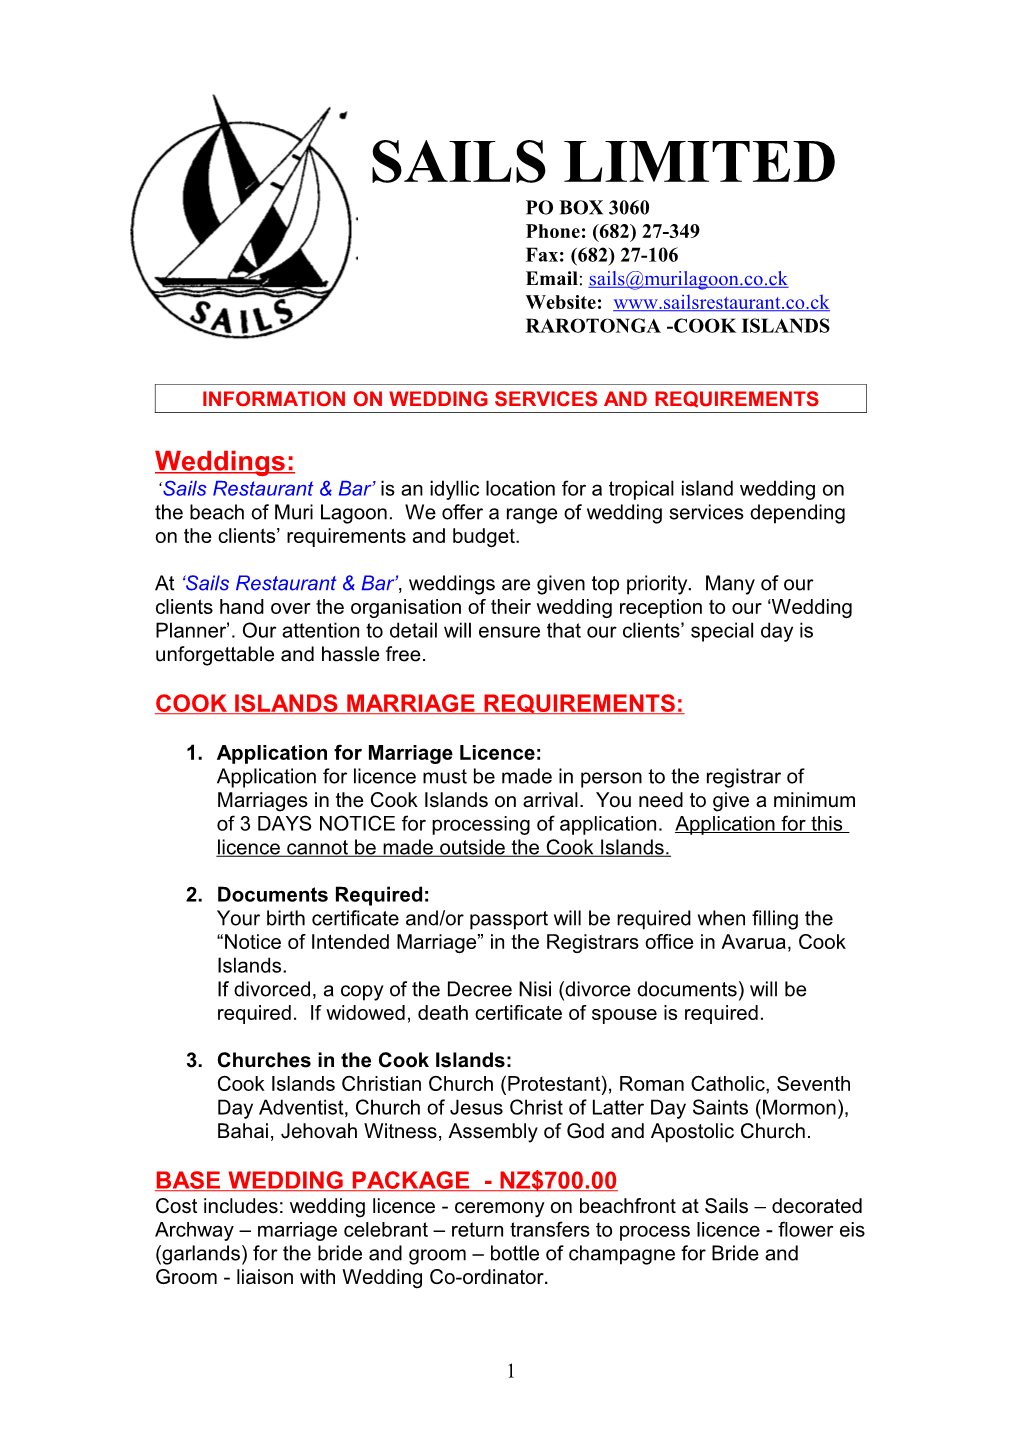 Information on Wedding Services and Requirements